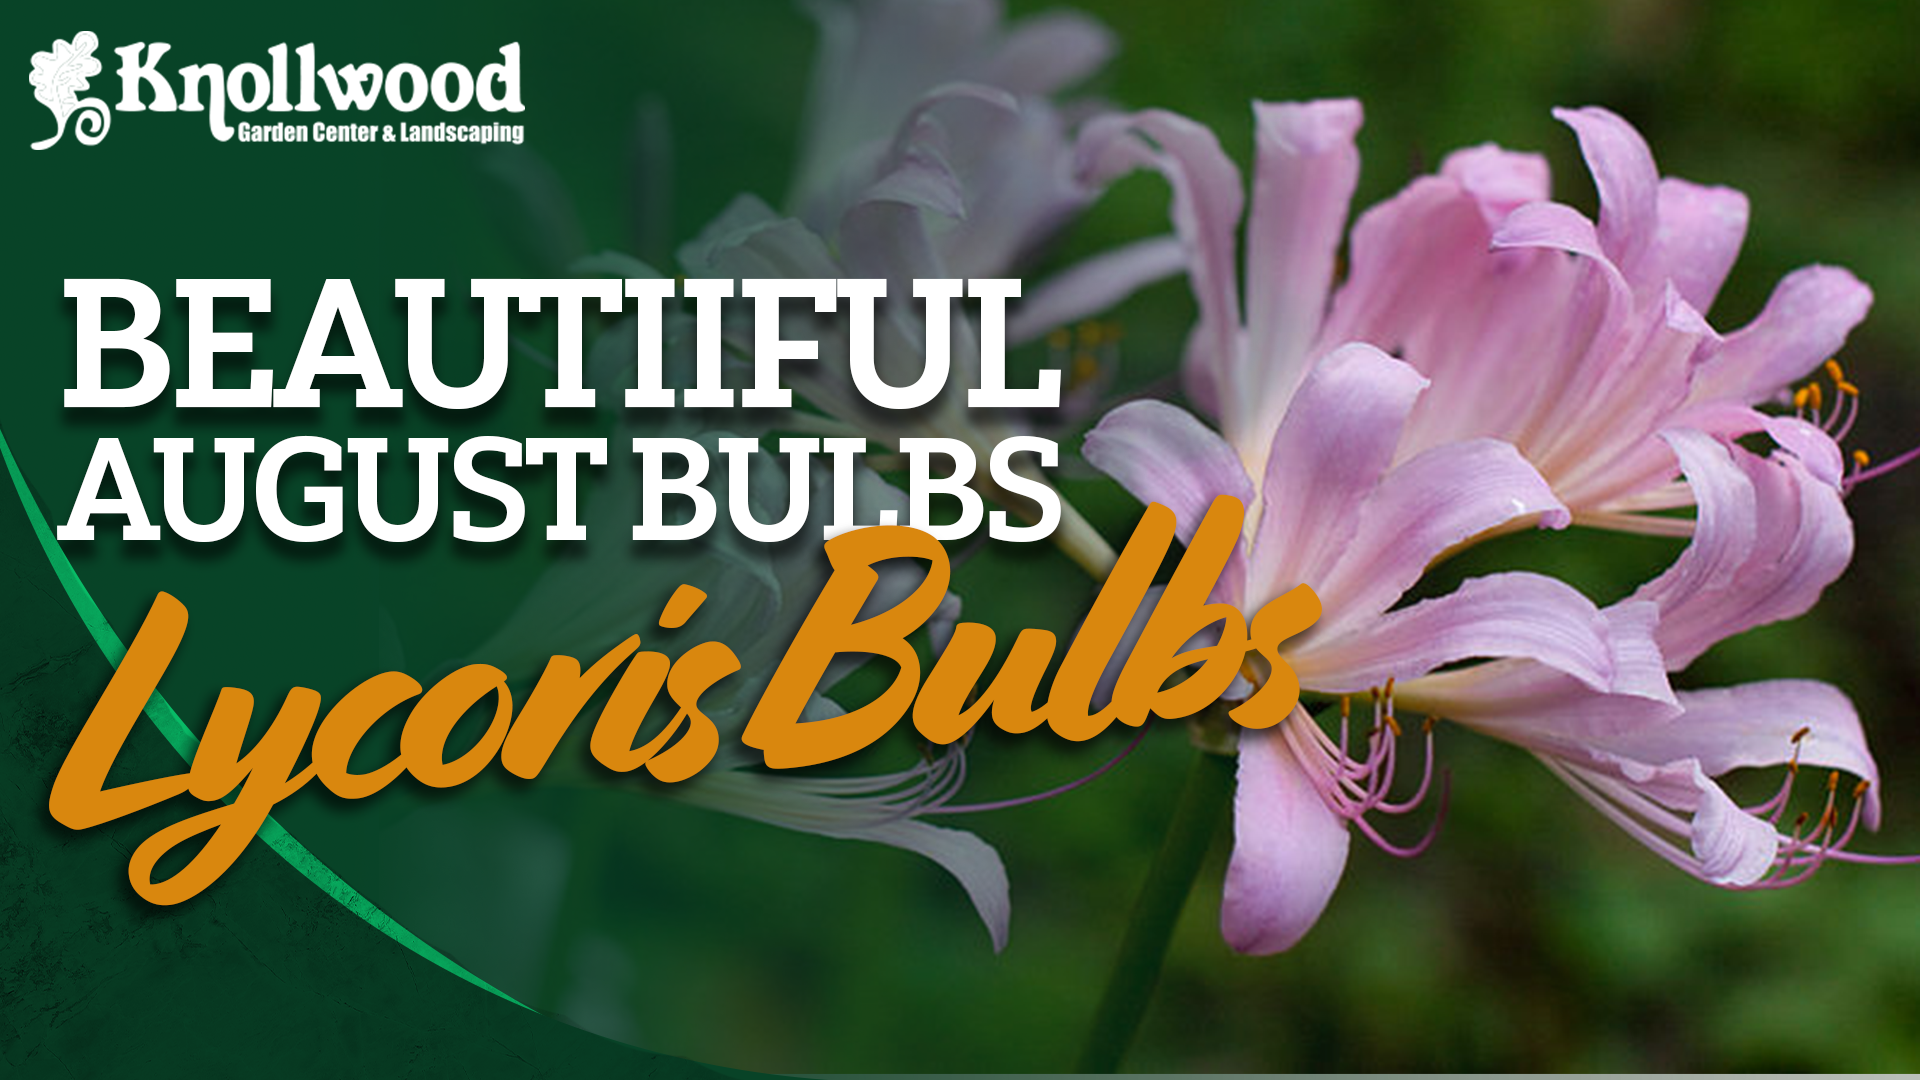 A pink resurrection lily with the text "Beautiful August Bulbs: Lycoris Bulbs (Resurrection Lilies)" 